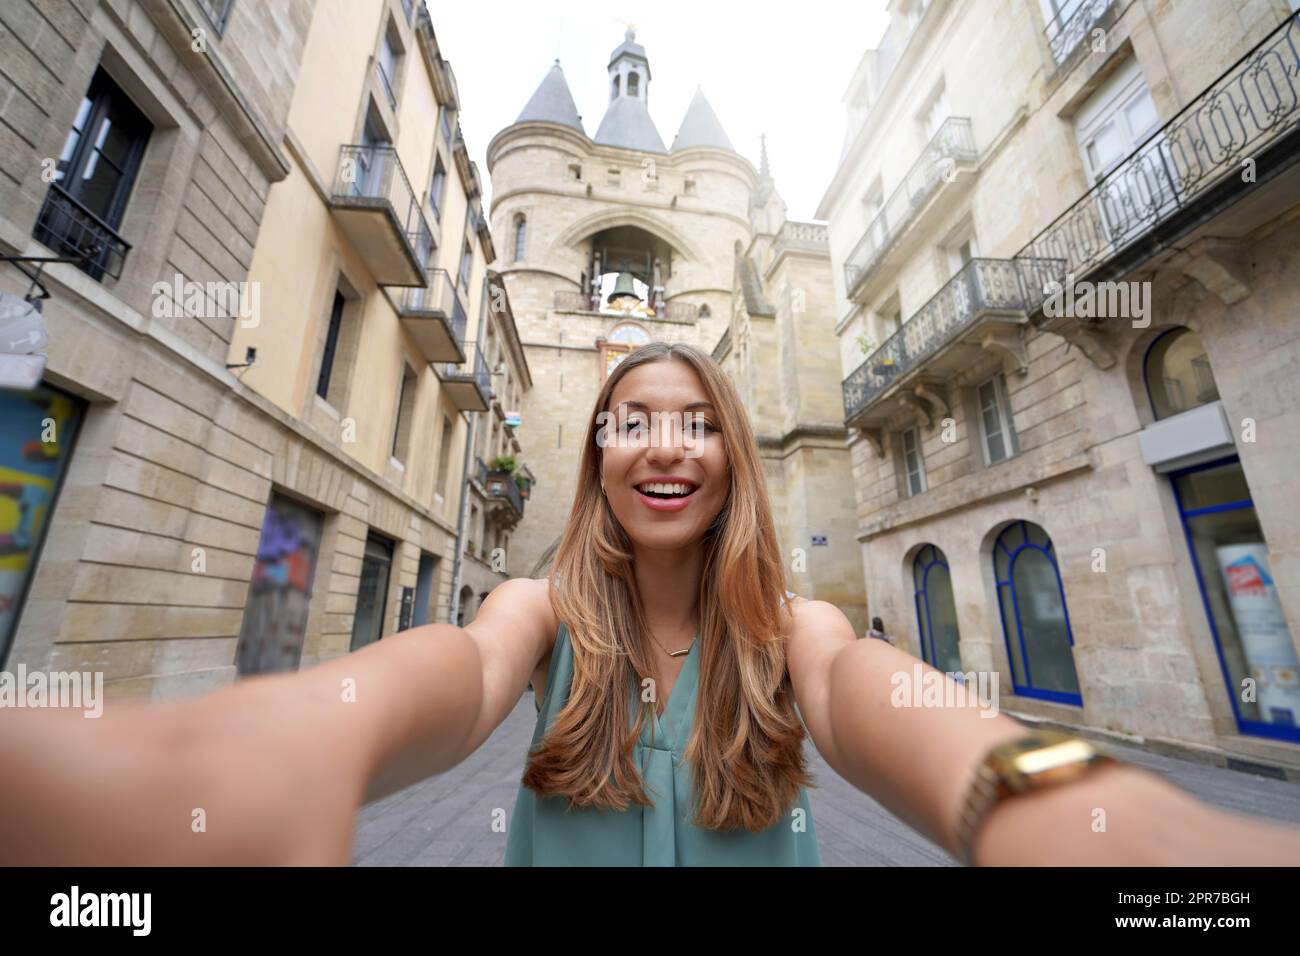 Self portrait of young tourist woman smiling at camera with La Grosse cloche historic bell tower in Bordeaux, France Stock Photo